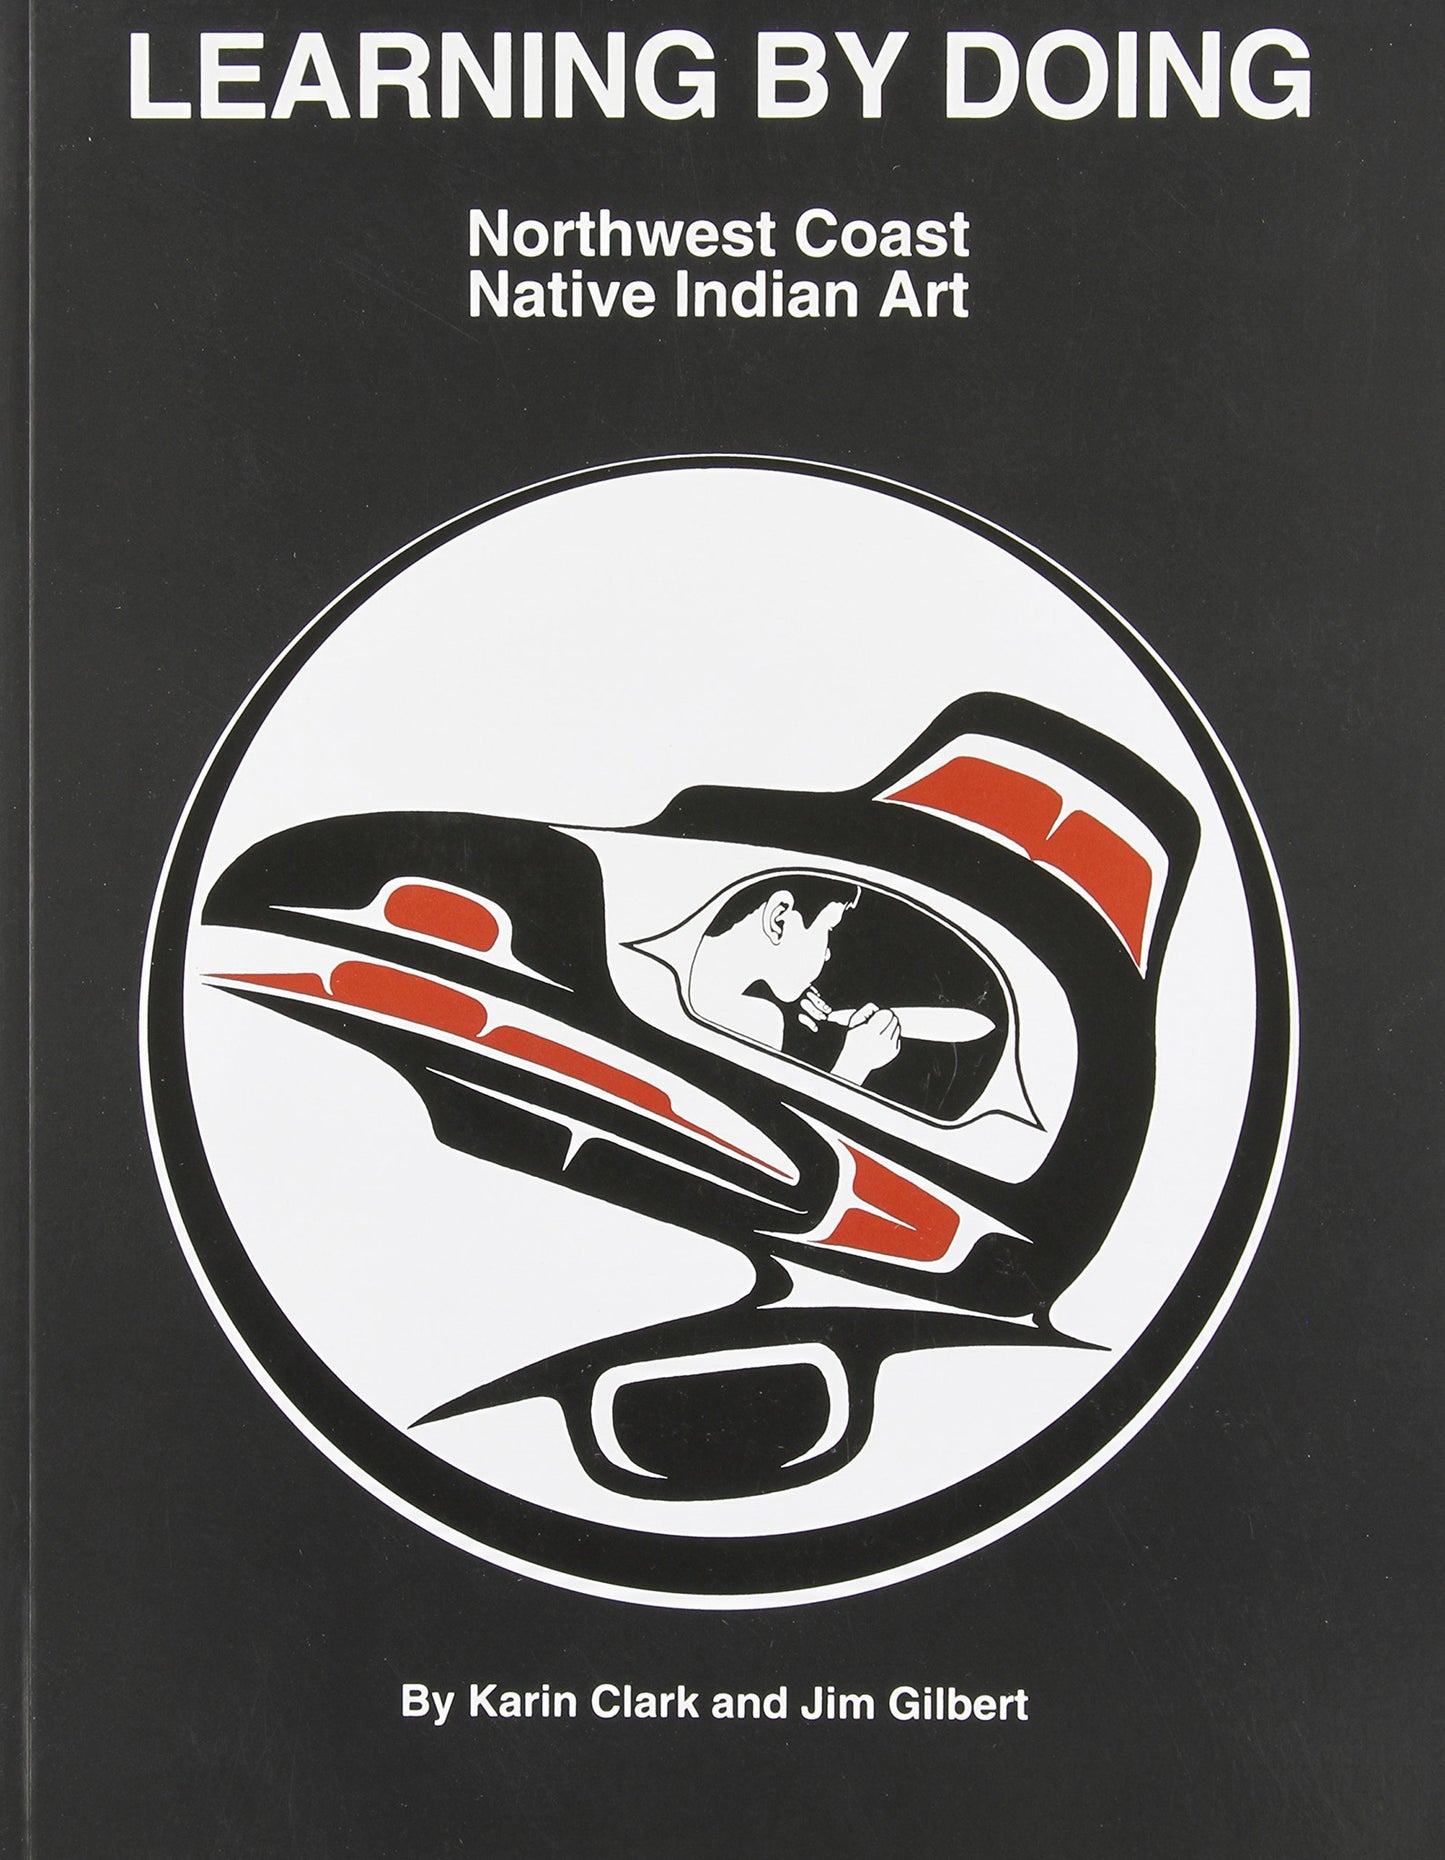 Learning by Doing: Northwest Coast Native Indian Art by Jm Gilbert and Karin Clark